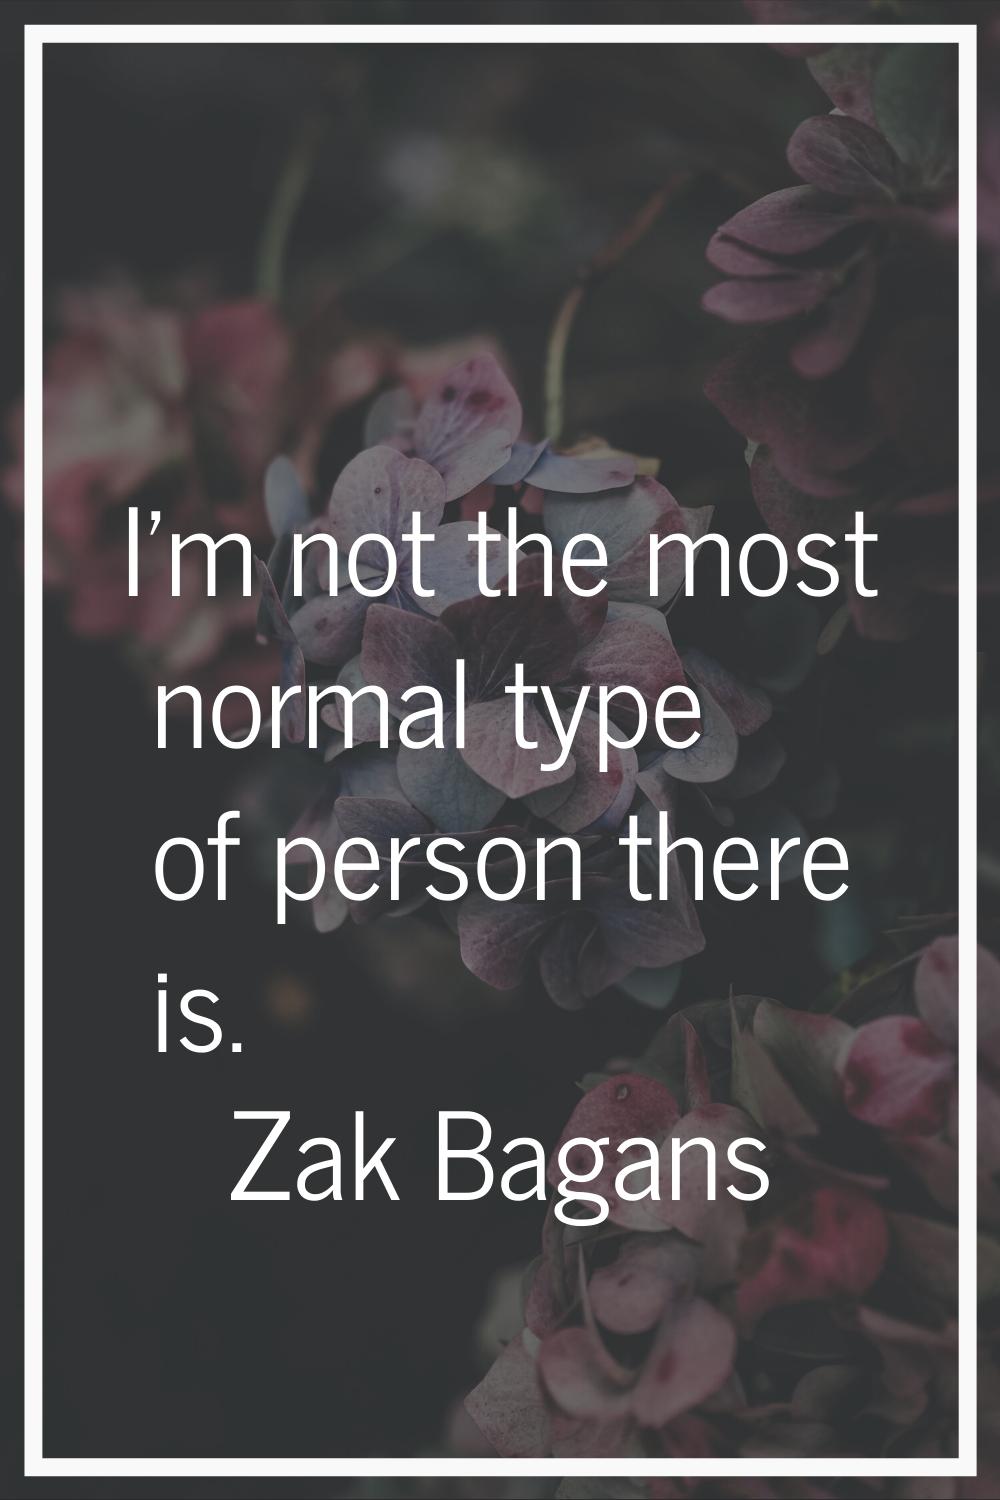 I'm not the most normal type of person there is.